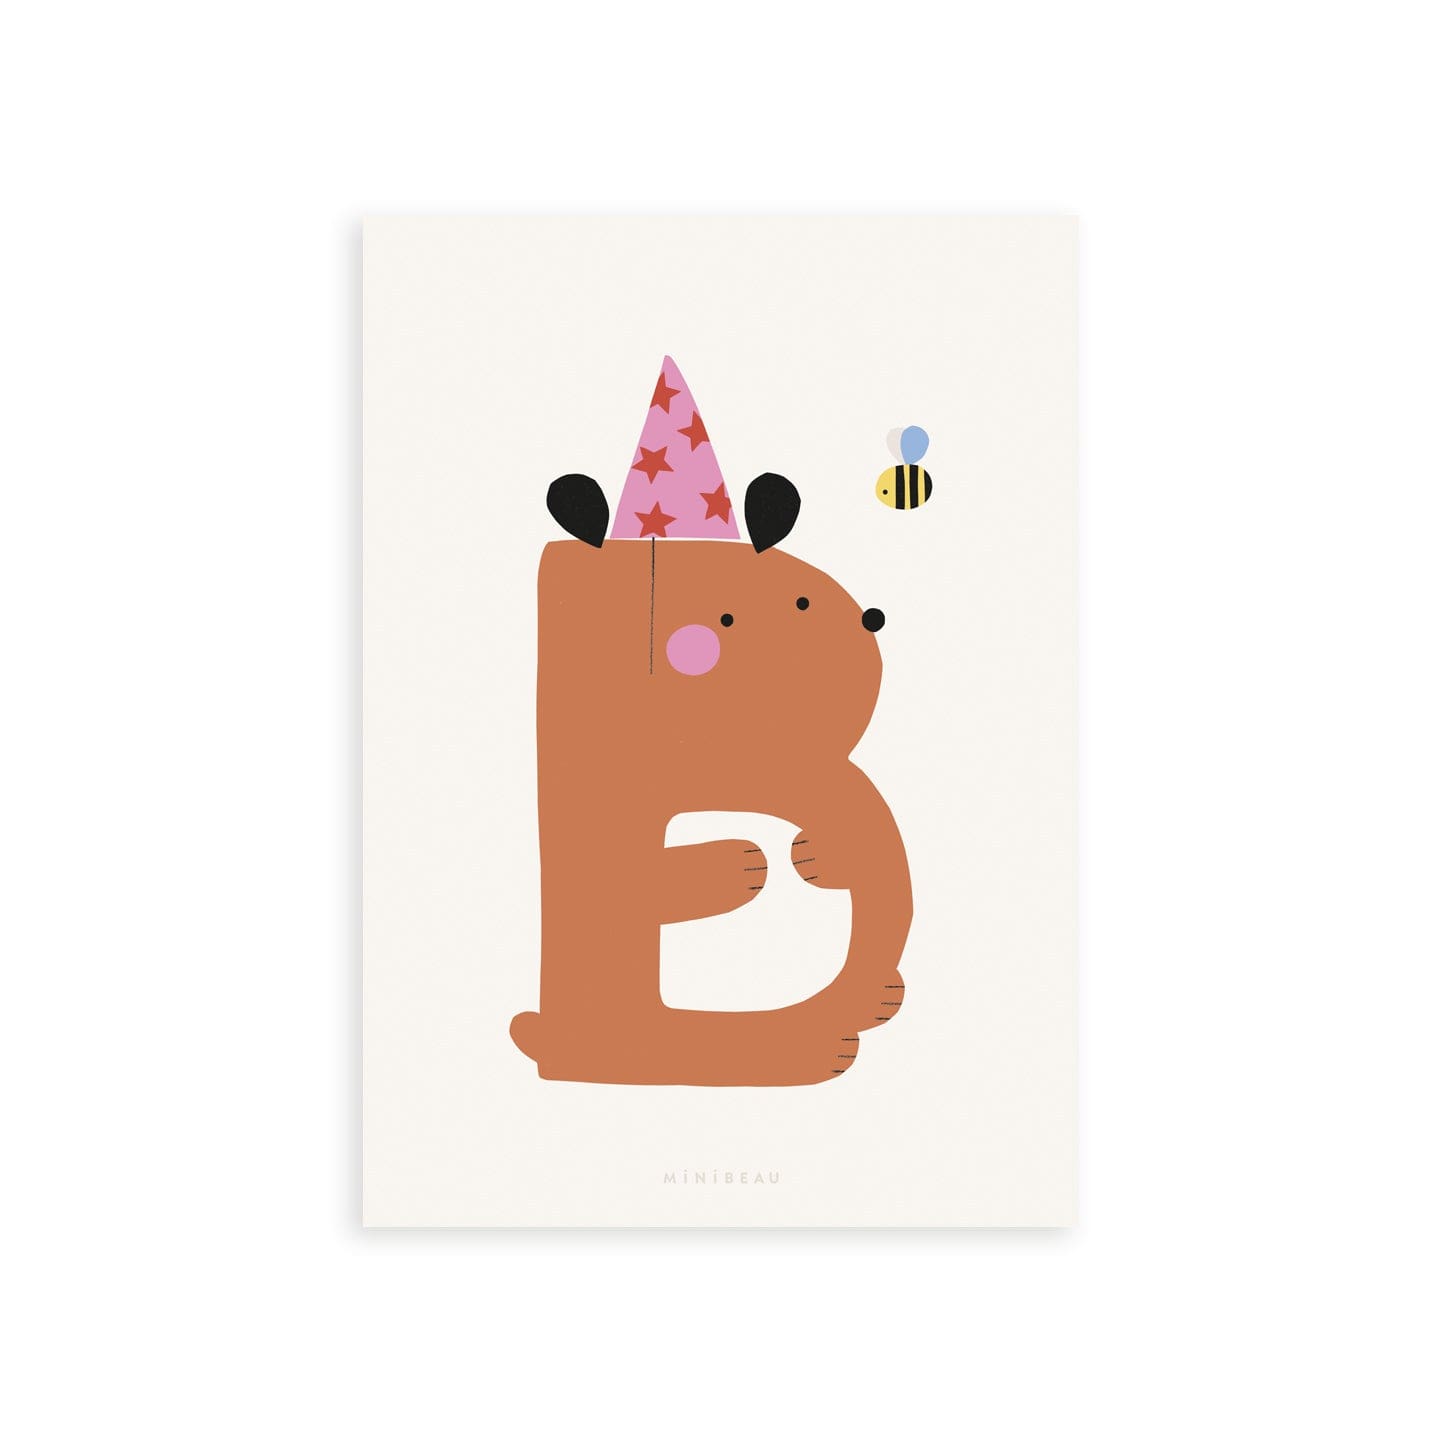 Our Happy Alphabet 'B' Art Print shows a brown bear with a white tummy in the shape of a B in a pink party hat with red stars on, with a bee buzzing around it's head. On a neutral background.